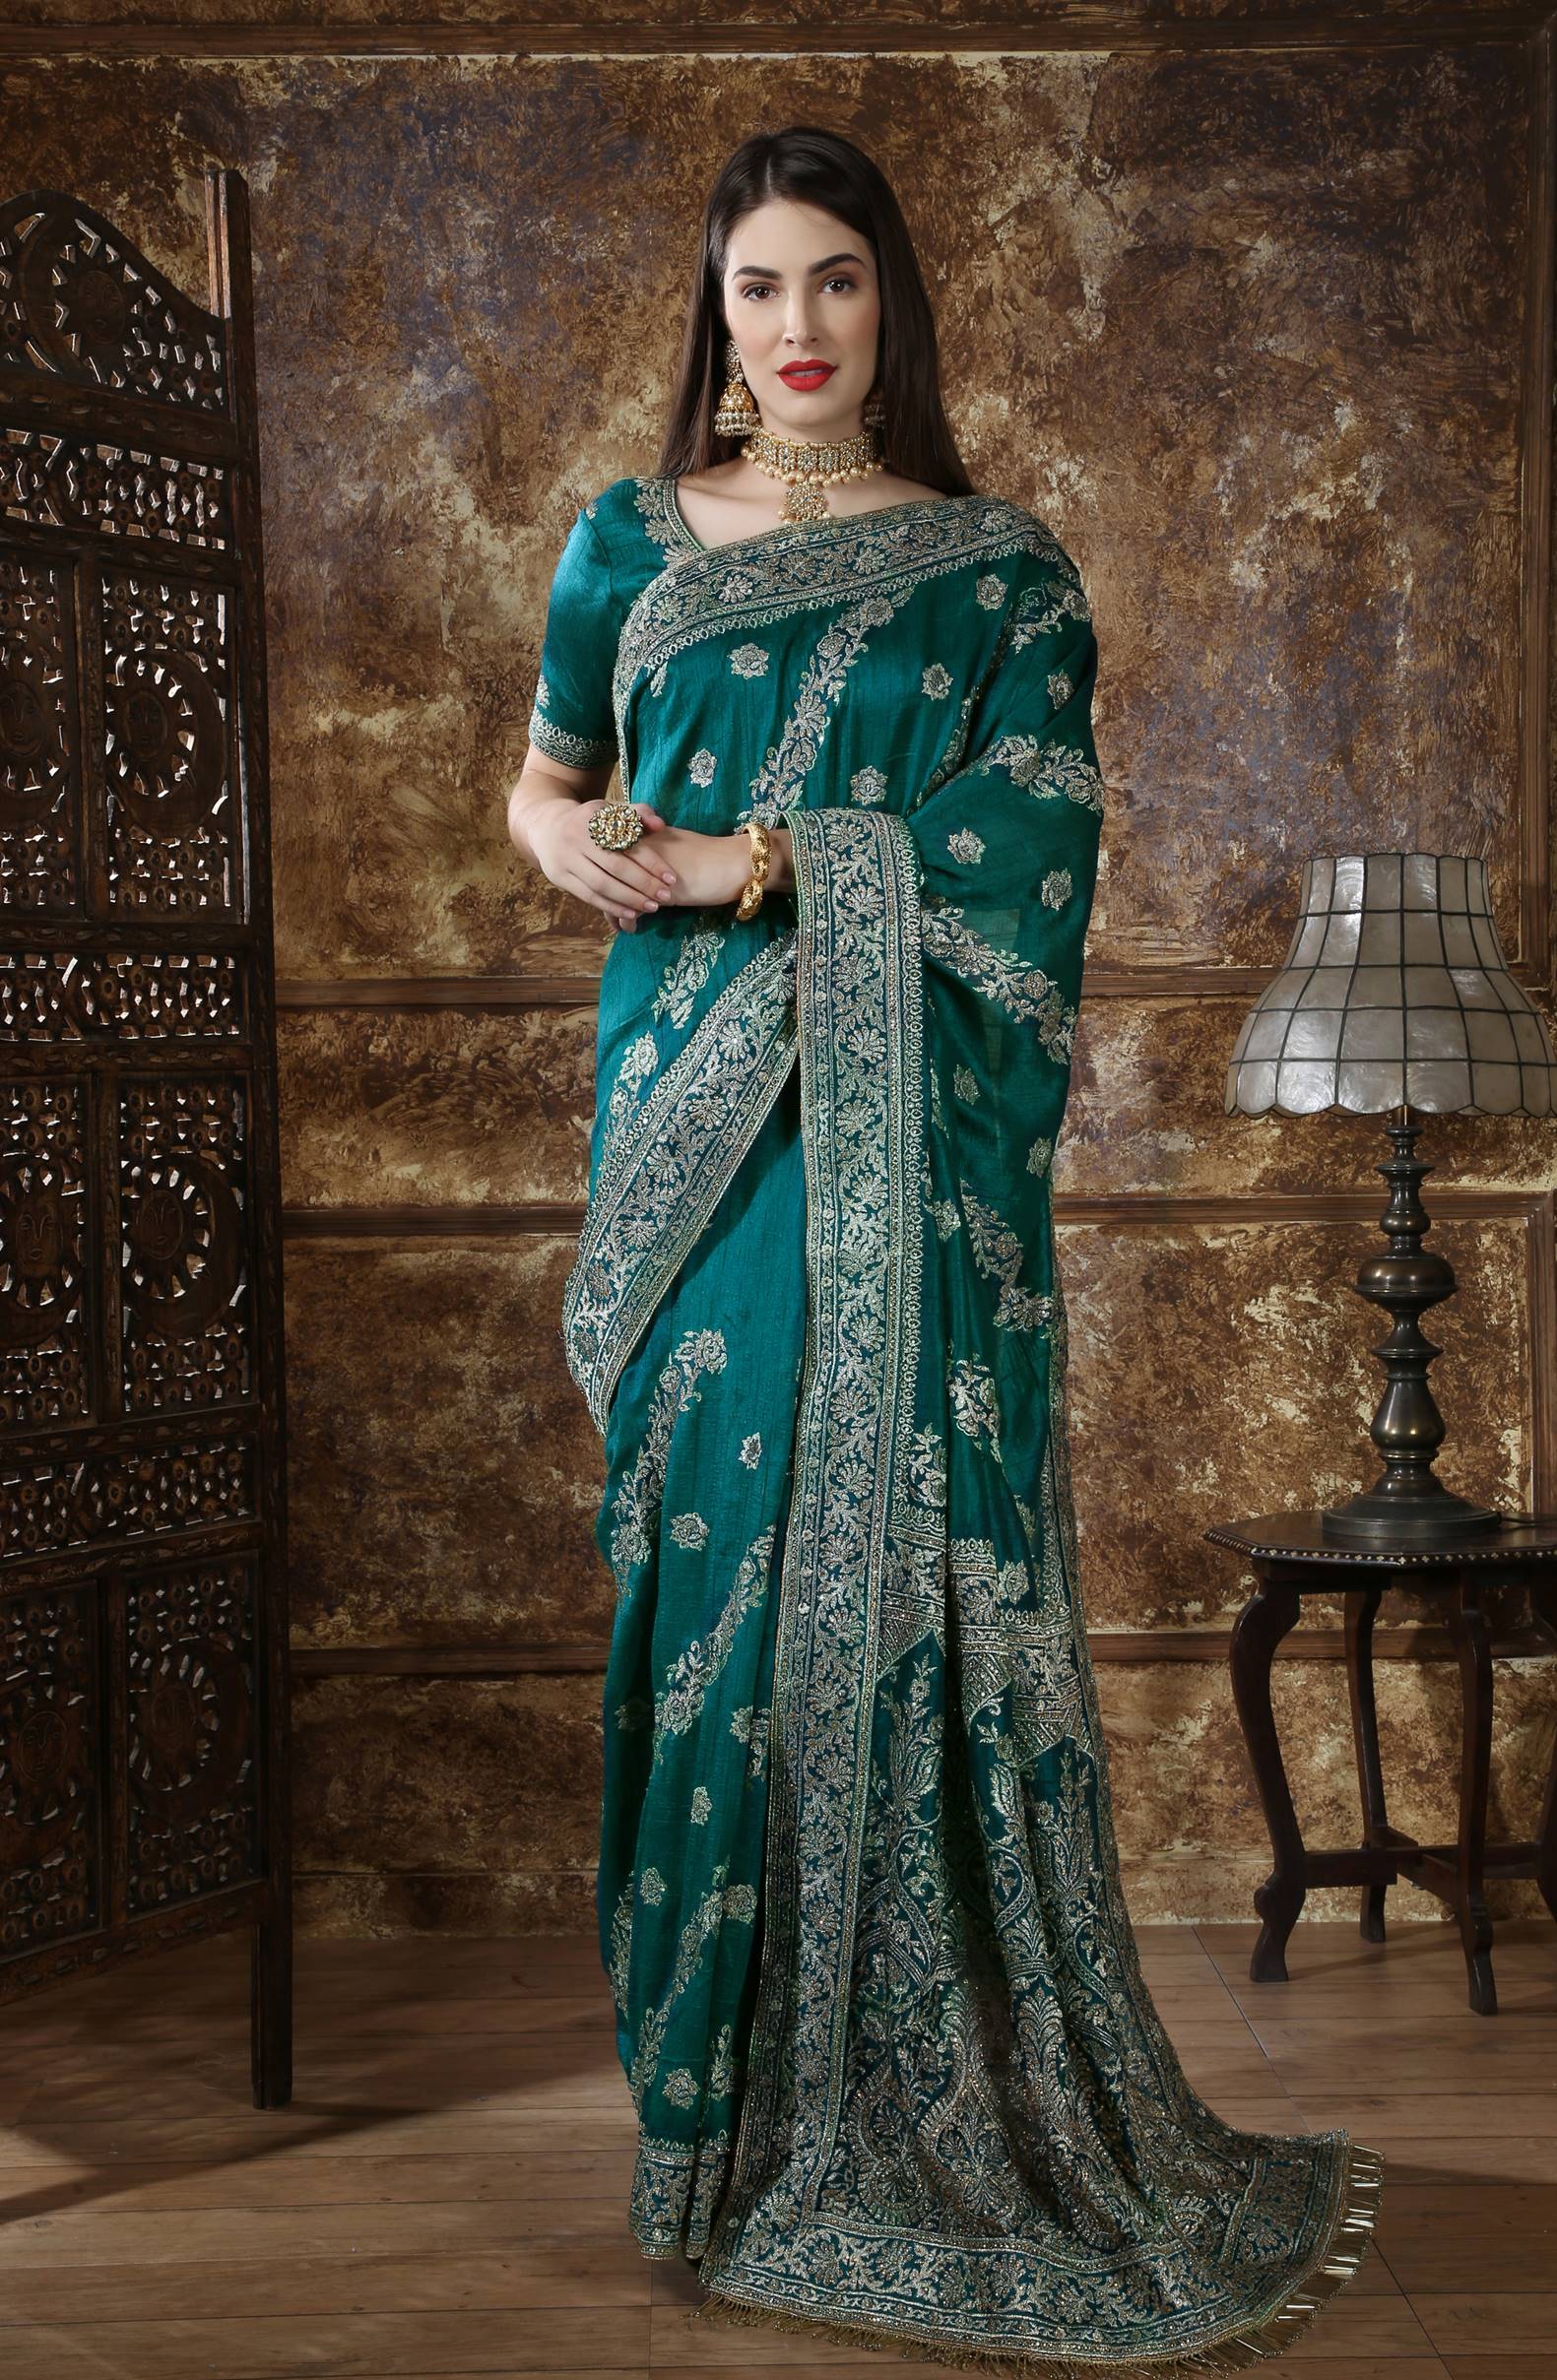 Latest Silk Sarees For Parties And Weddings At Wholesale Rat...